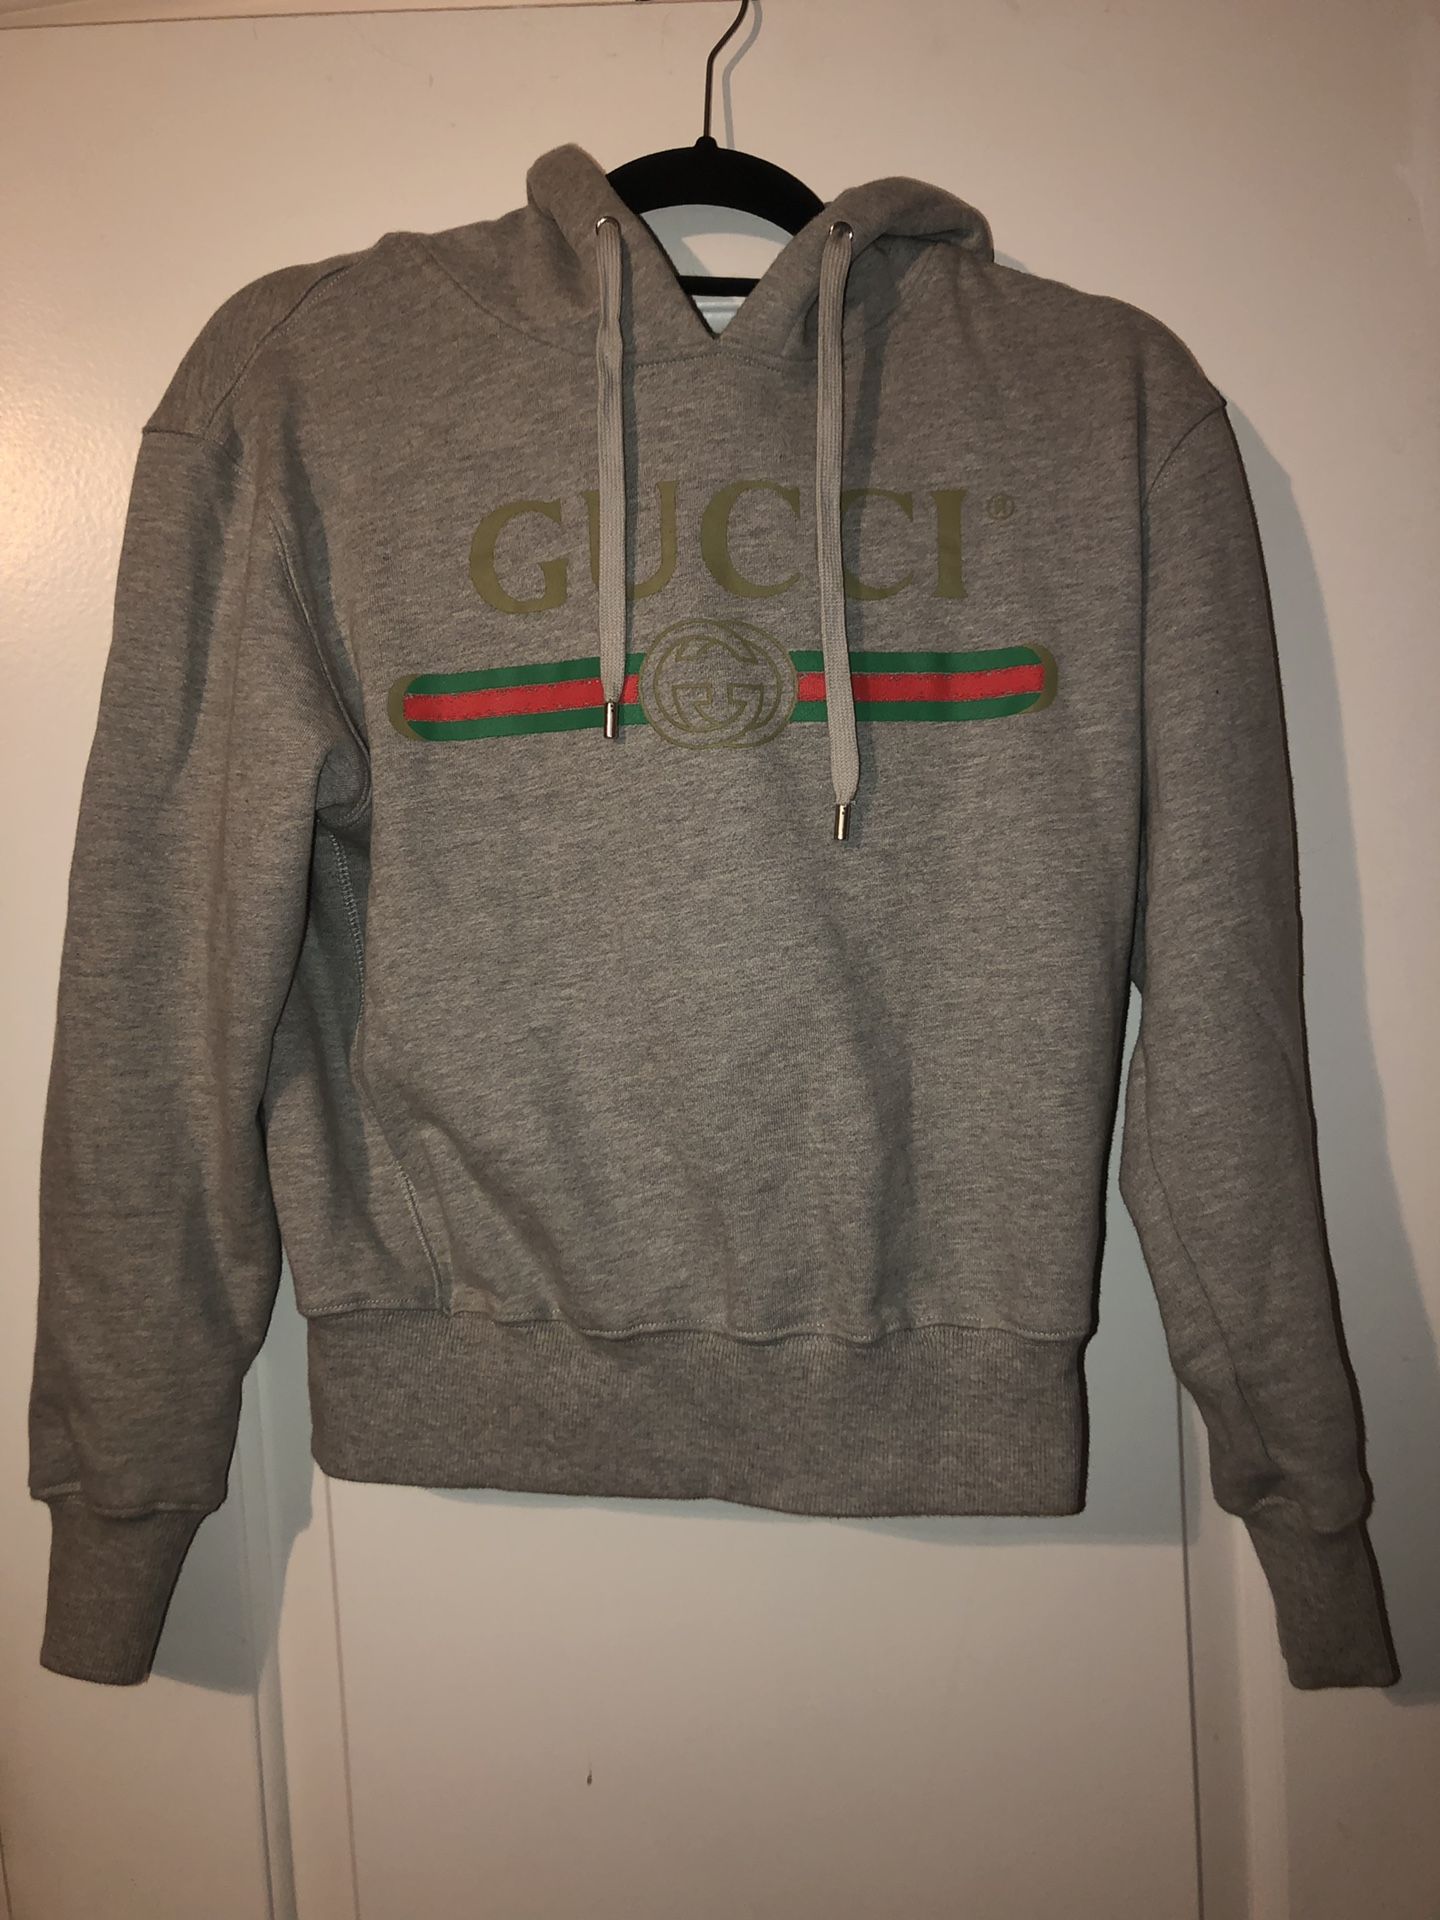 Gucci hoodie 100% AUTHENTIC SIZE M